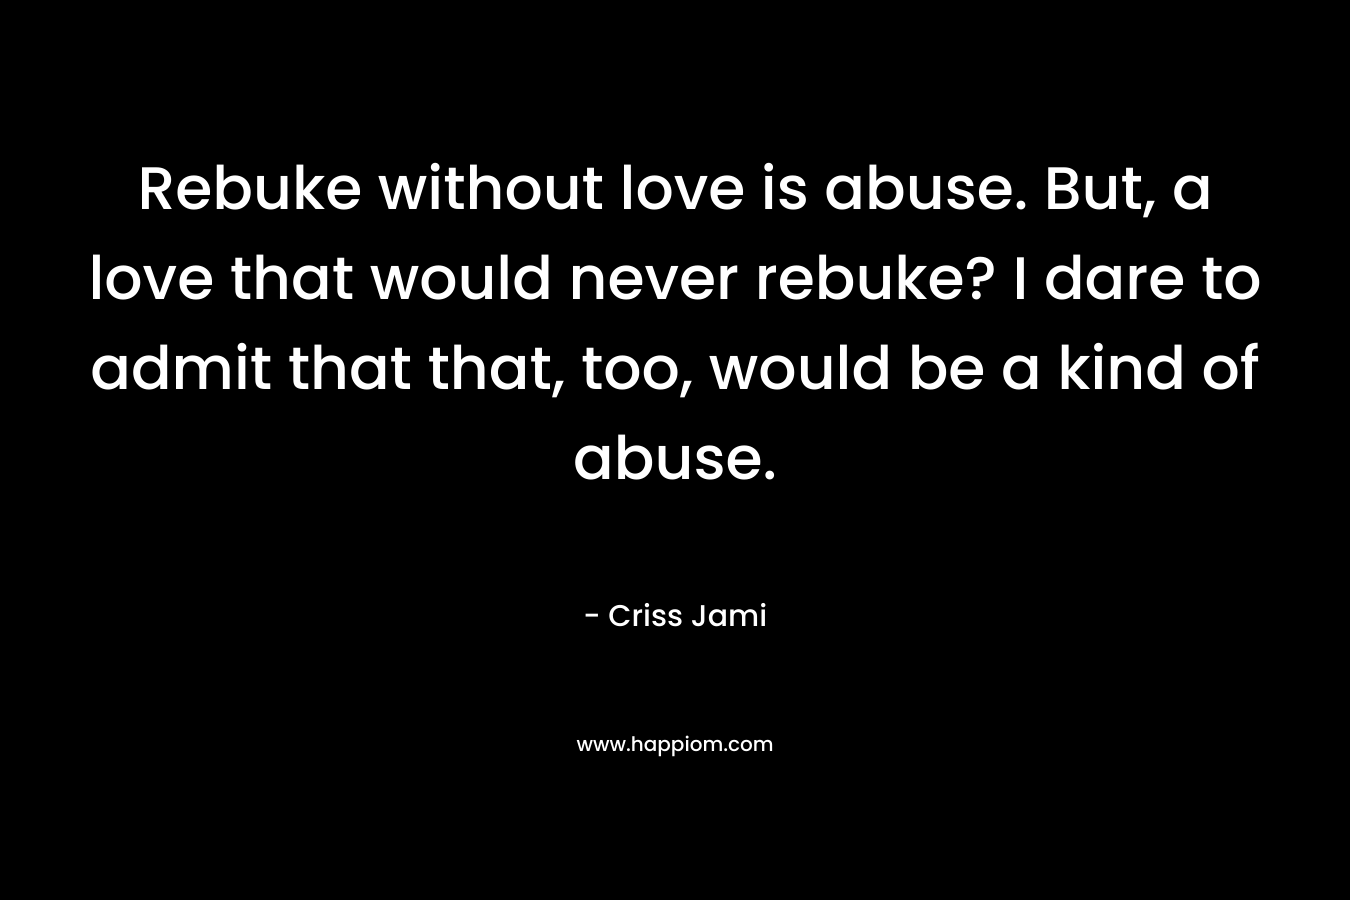 Rebuke without love is abuse. But, a love that would never rebuke? I dare to admit that that, too, would be a kind of abuse.